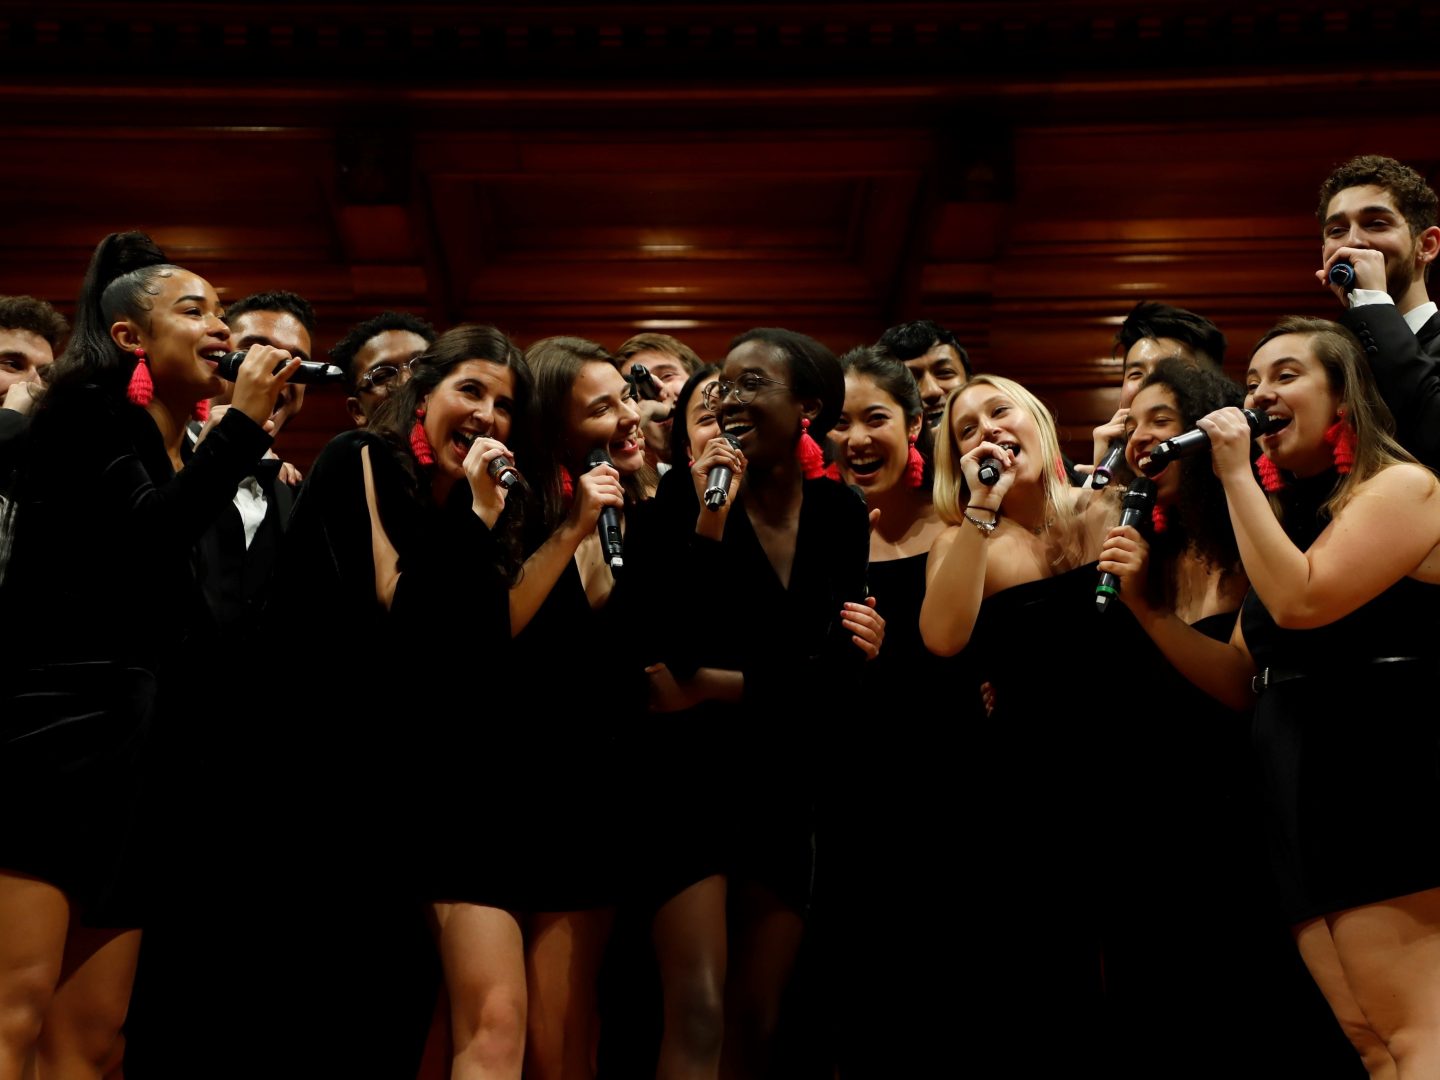 The Harvard Opportunes is one of the four groups to advance to the final stages of UpStaged National Collegiate Performing Arts A Cappella Championship.